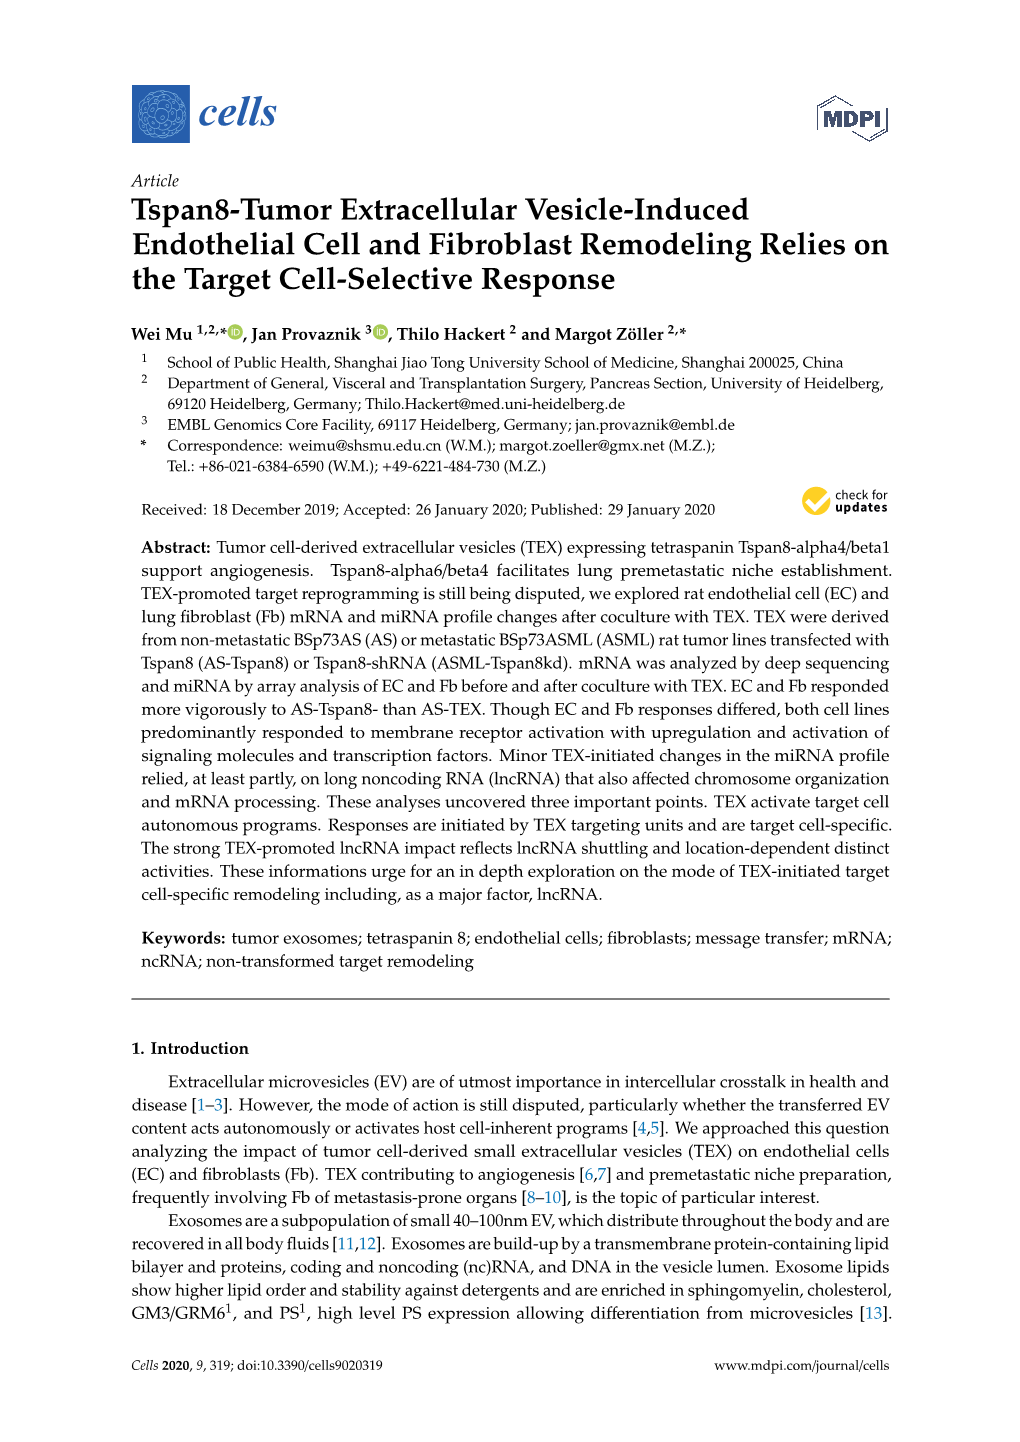 Tspan8-Tumor Extracellular Vesicle-Induced Endothelial Cell and Fibroblast Remodeling Relies on the Target Cell-Selective Response